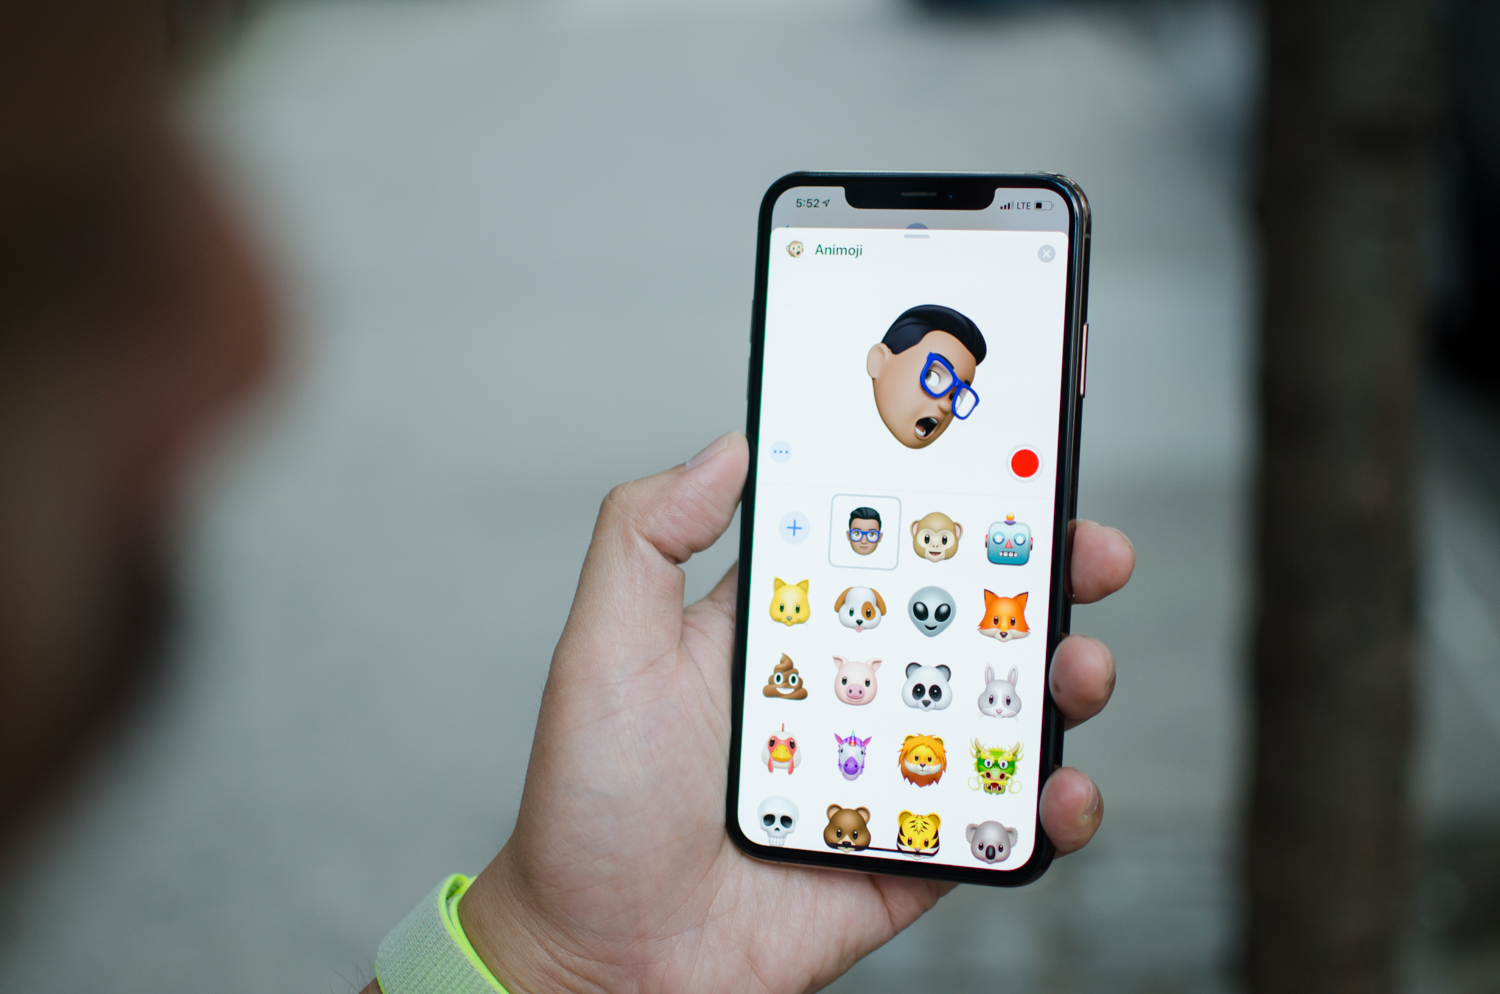 Apple iPhone XS Max Smartphone Review -  Reviews